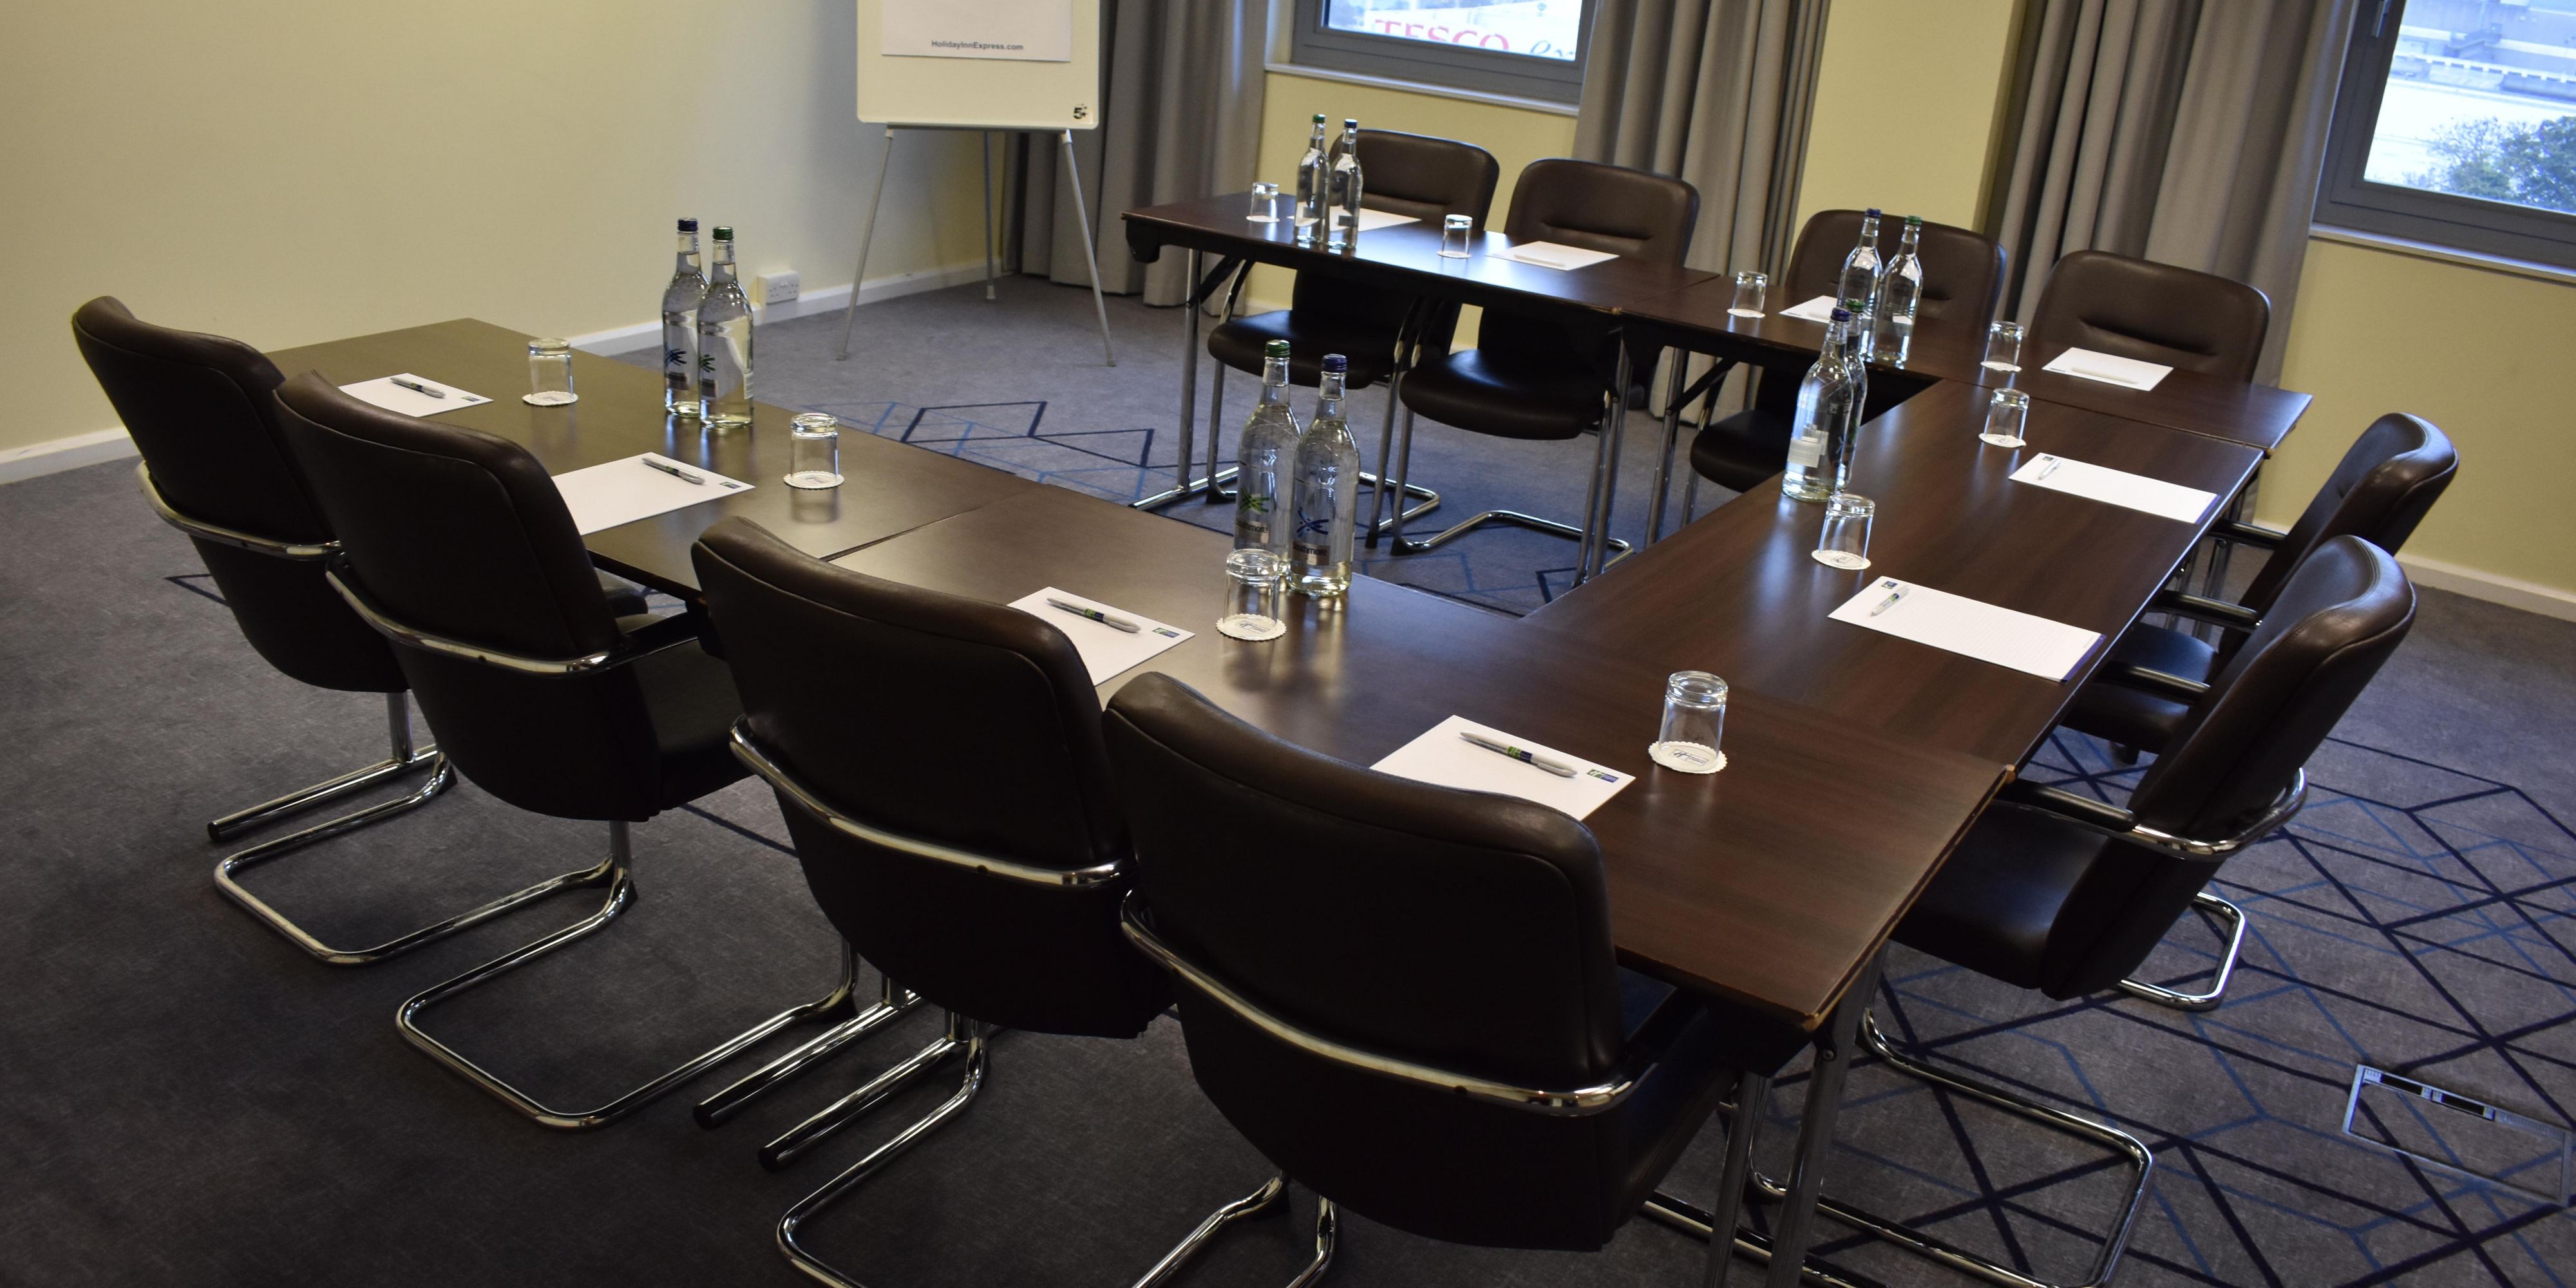 In all of our 4 meeting rooms we have the facilities for you to hold a meeting without coming face to face. With our updated Wi-Fi and conference phone facilities you will feel like to are face to face.